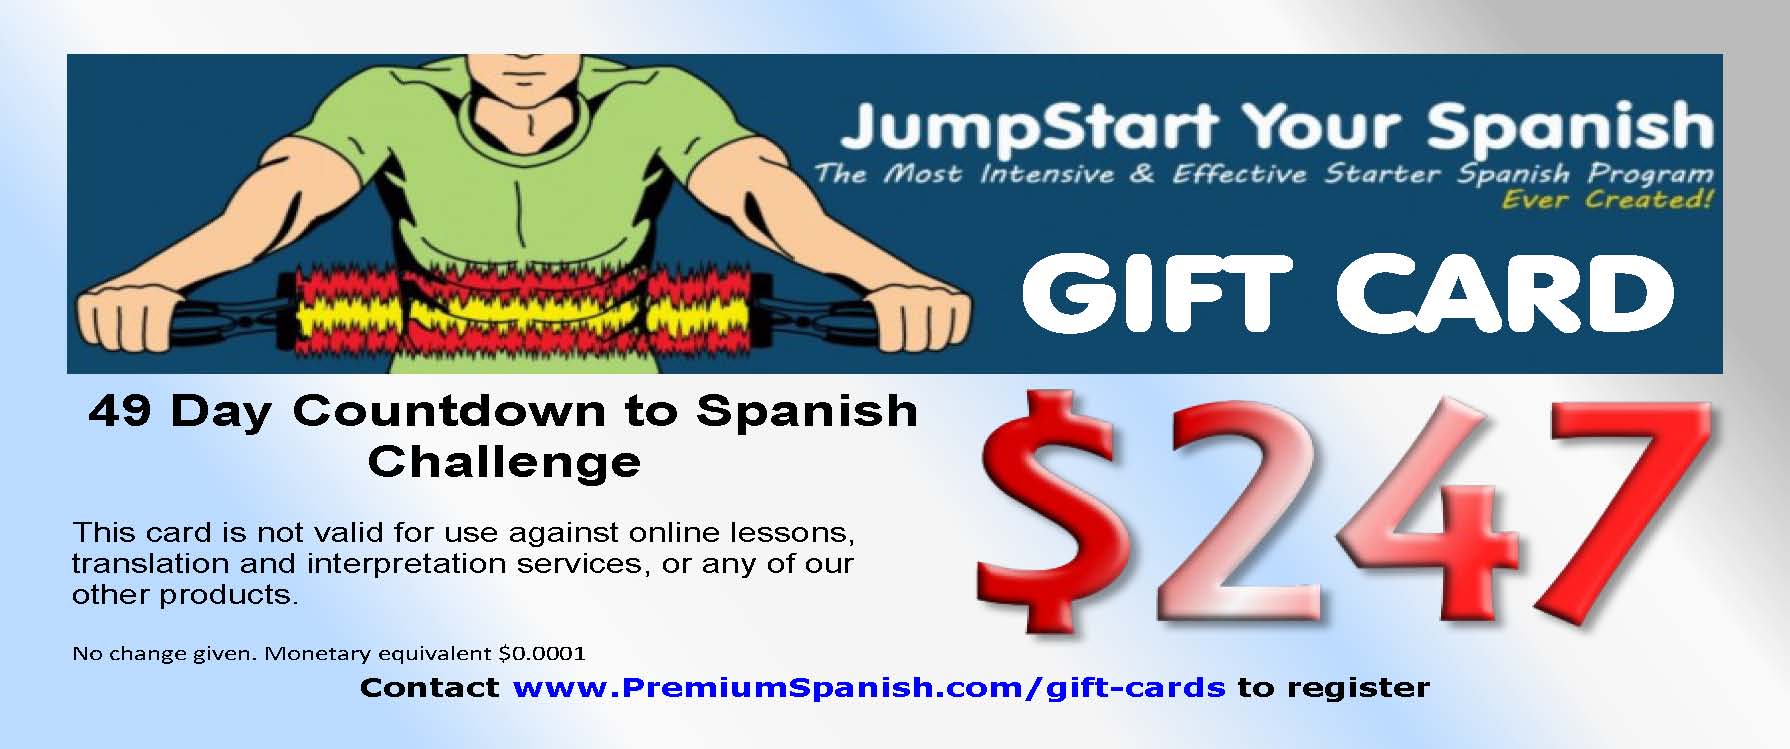 49-DAY-COUNTDOWN-TO-SPANISH CHALLENGE ~ GIFT CARD ~